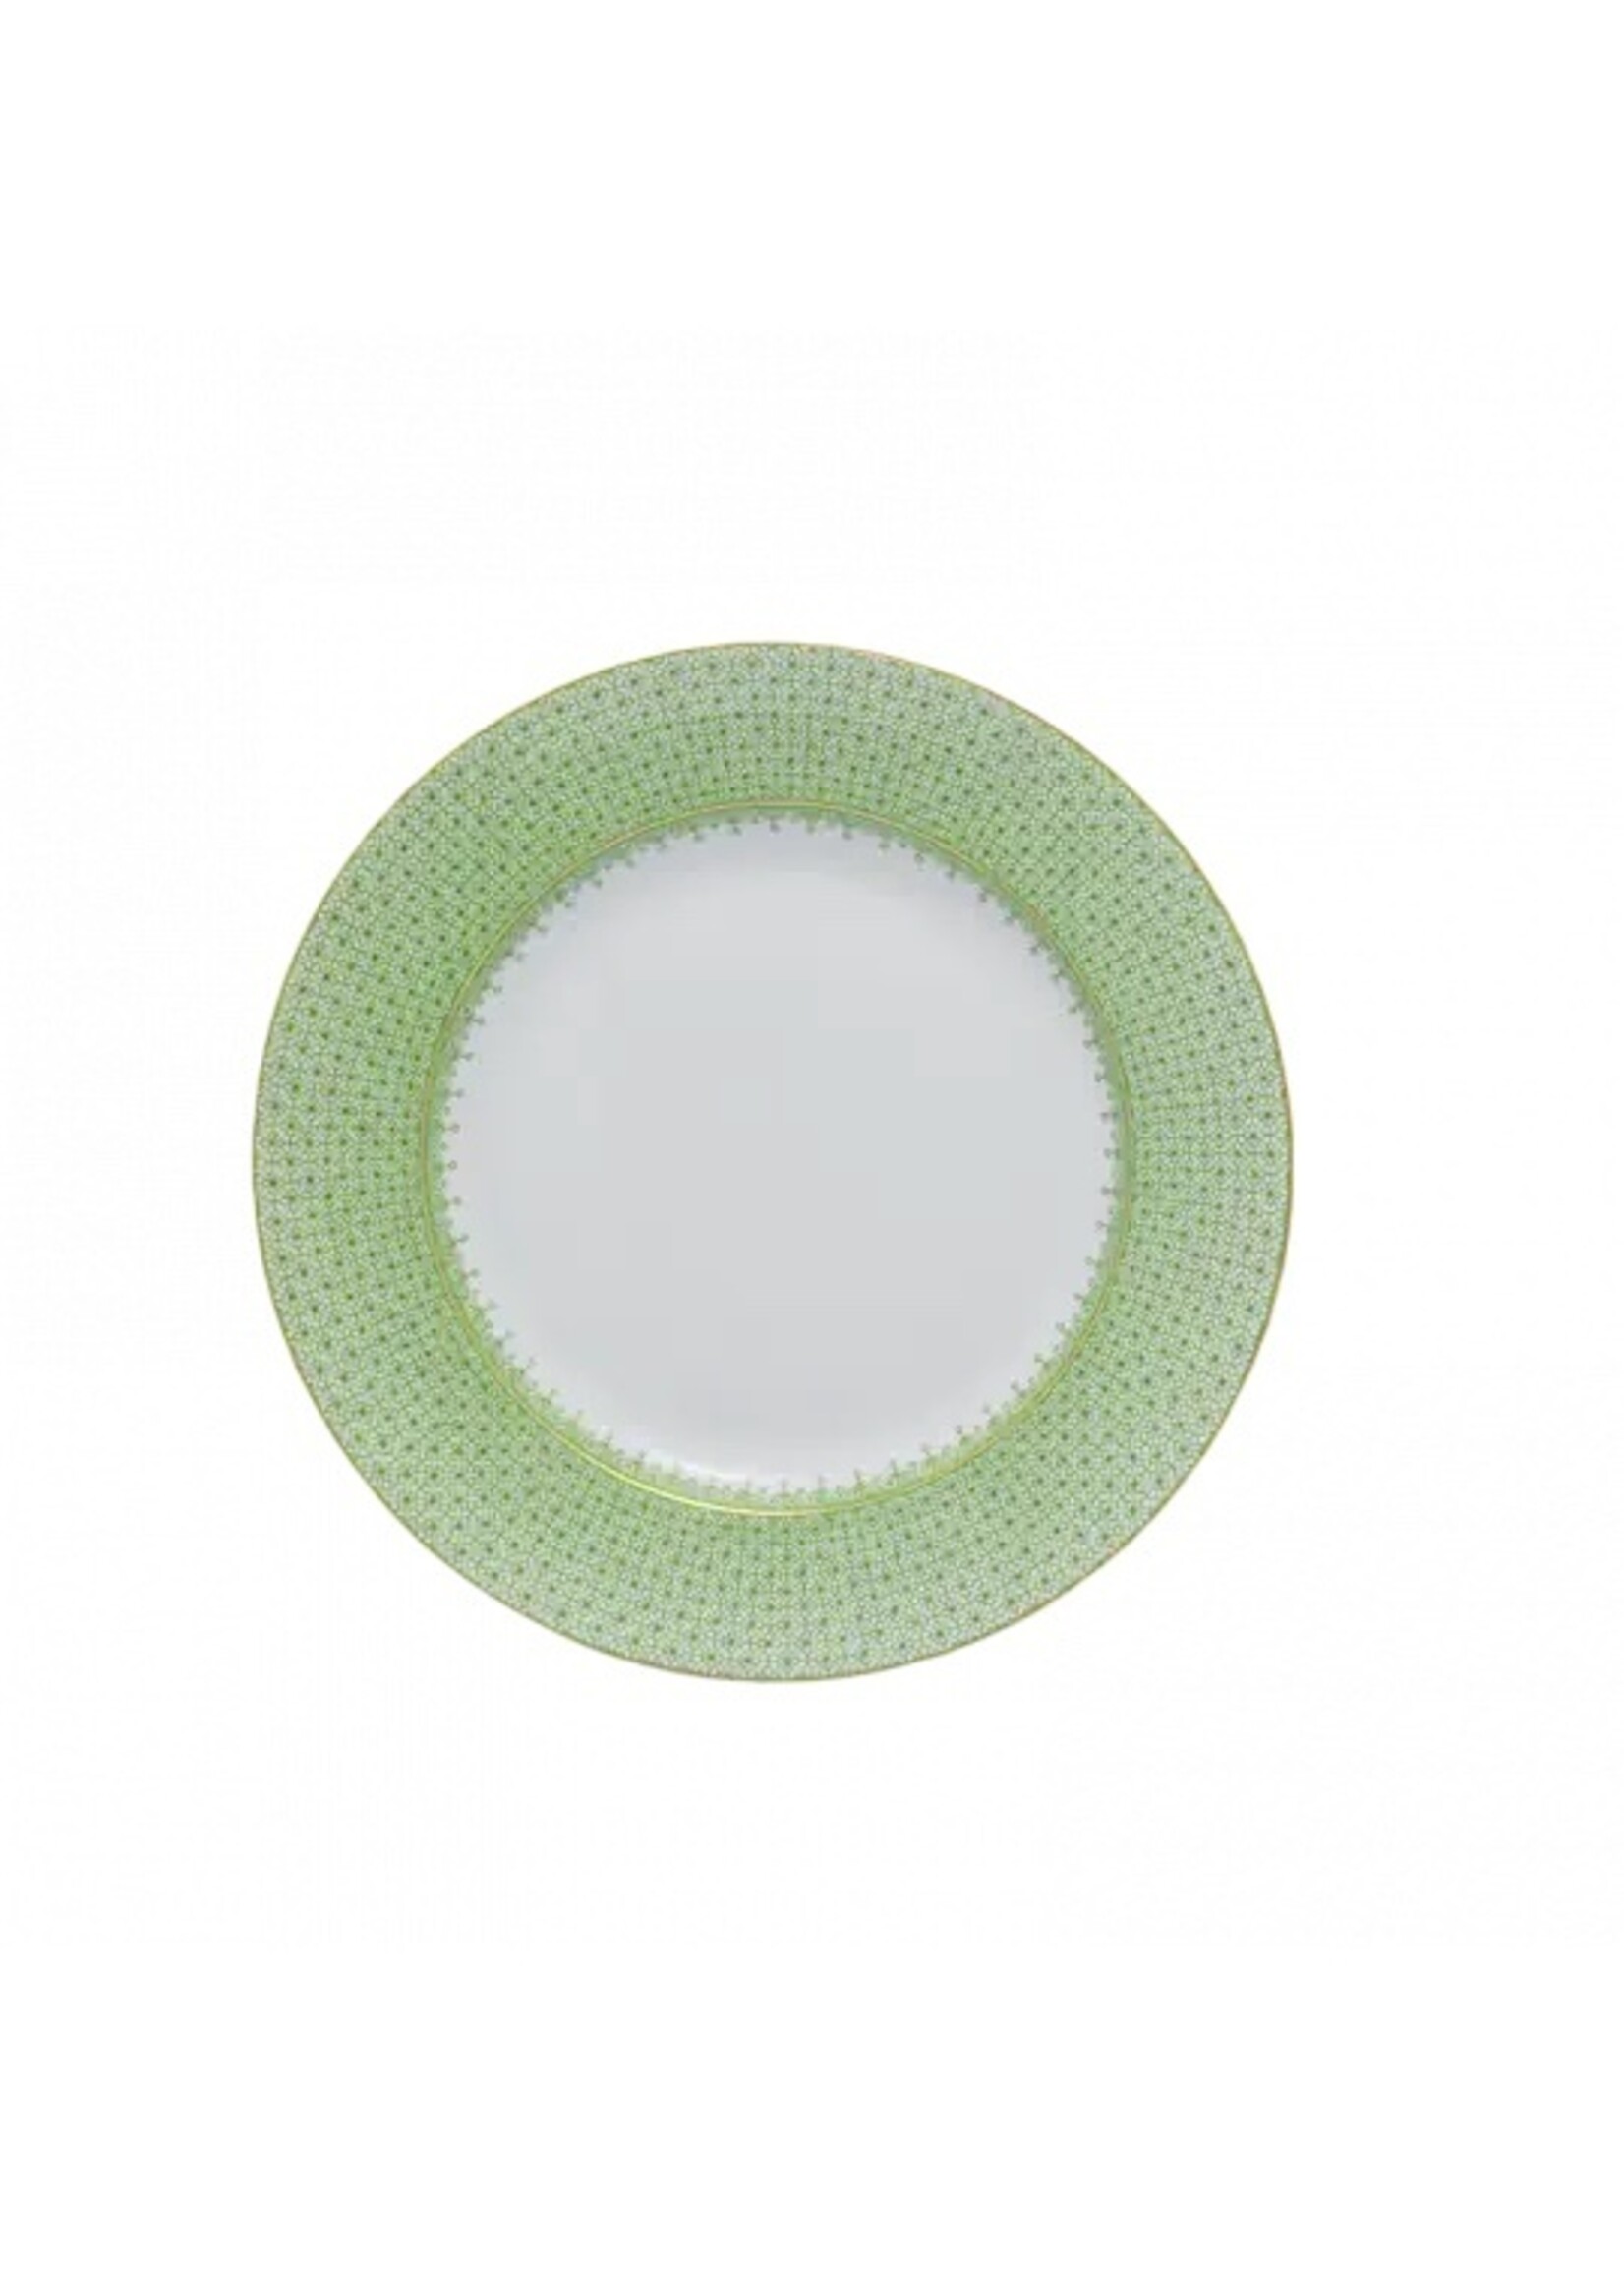 Mottahedeh Mottahedeh Apple Green Lace Bread & Butter Plate